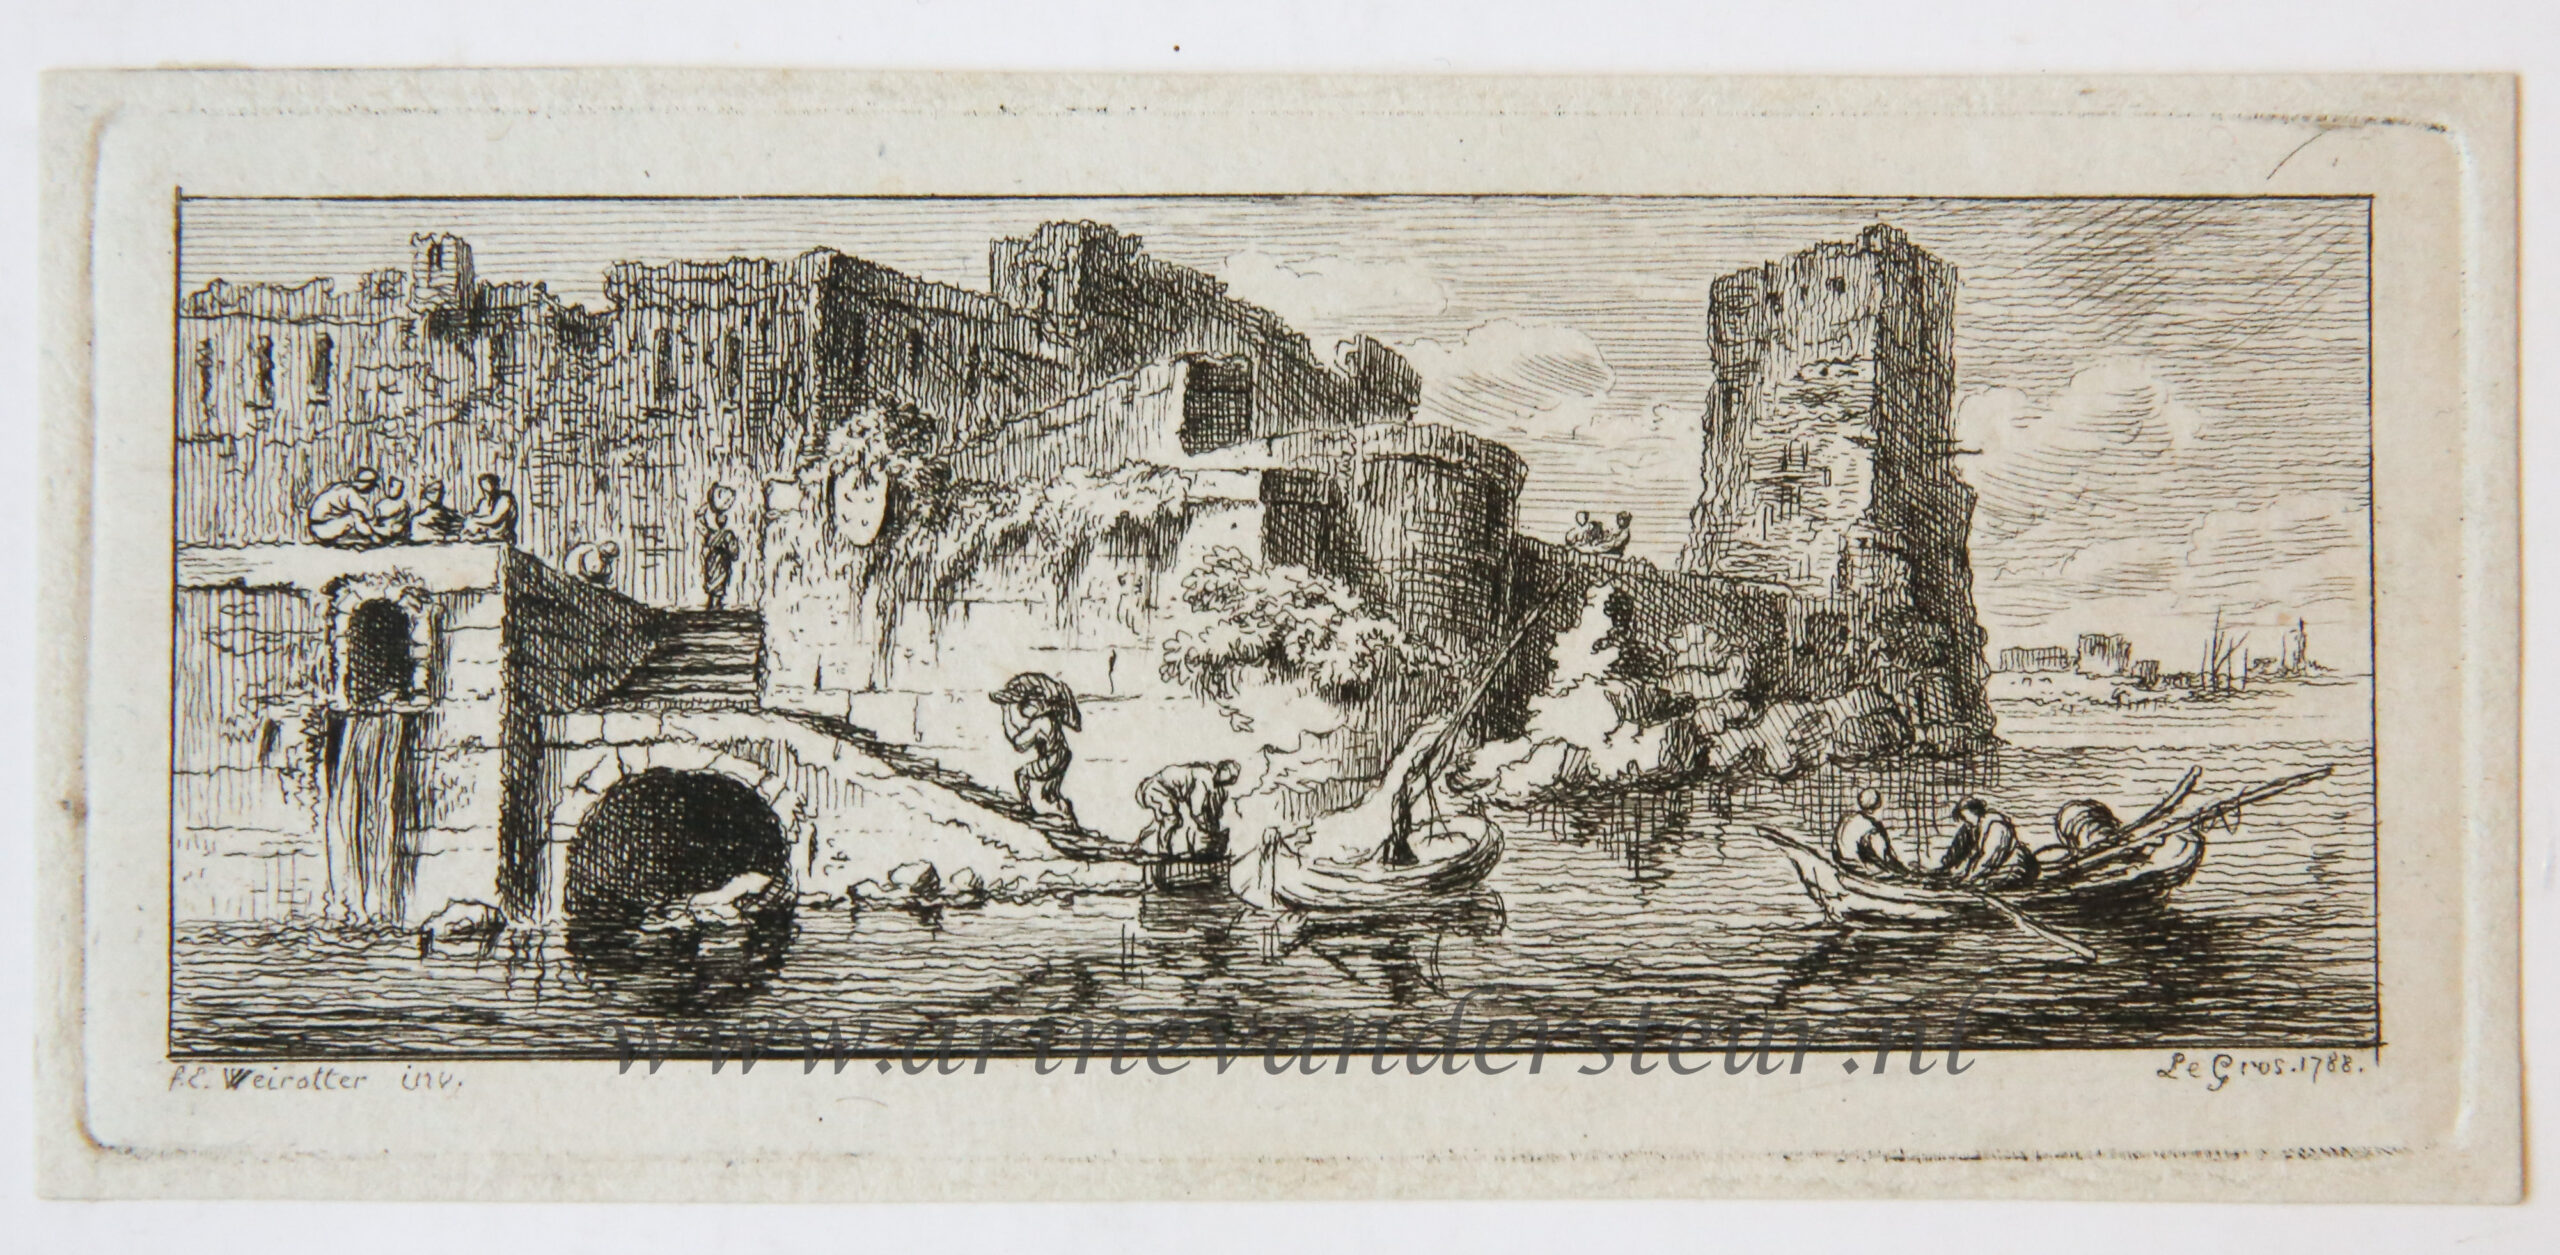 [Miniature antique print, etching] Salvator Legros, after Weirotter, River landscape with ruined buildings on the left, published 1788.